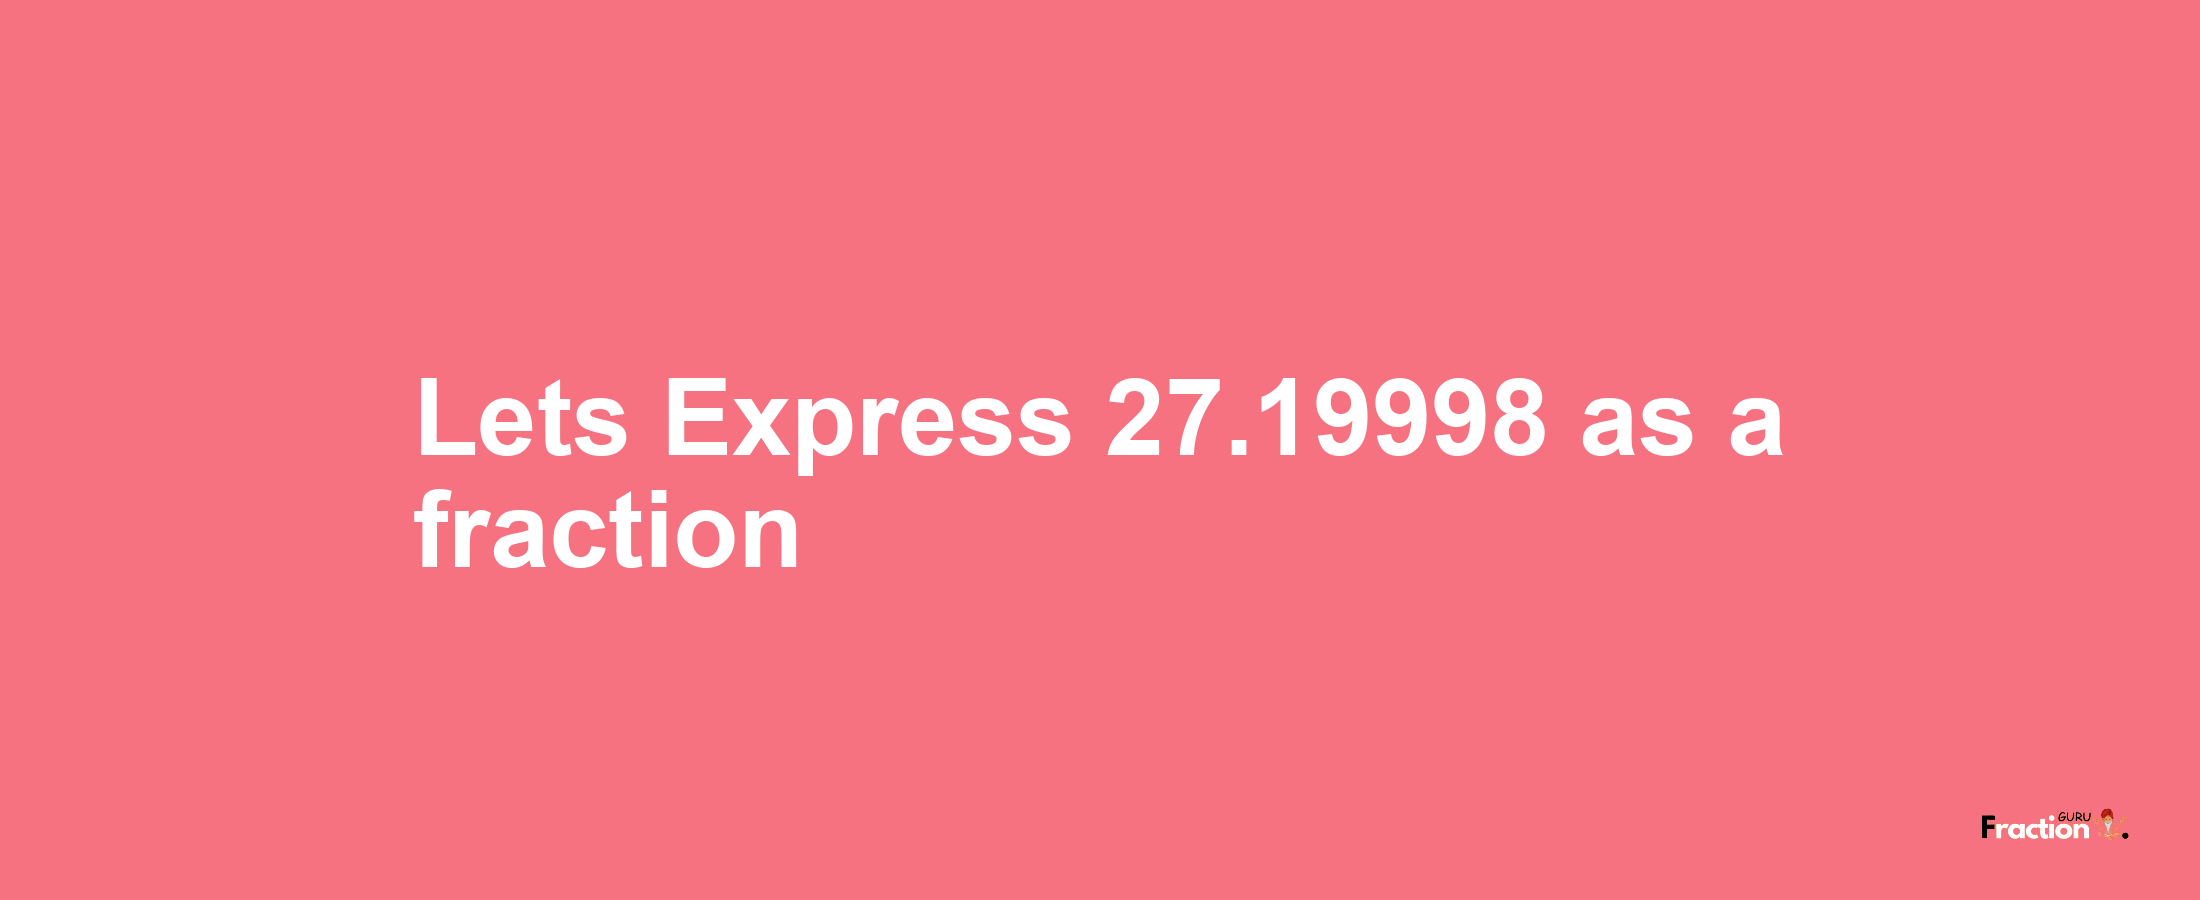 Lets Express 27.19998 as afraction